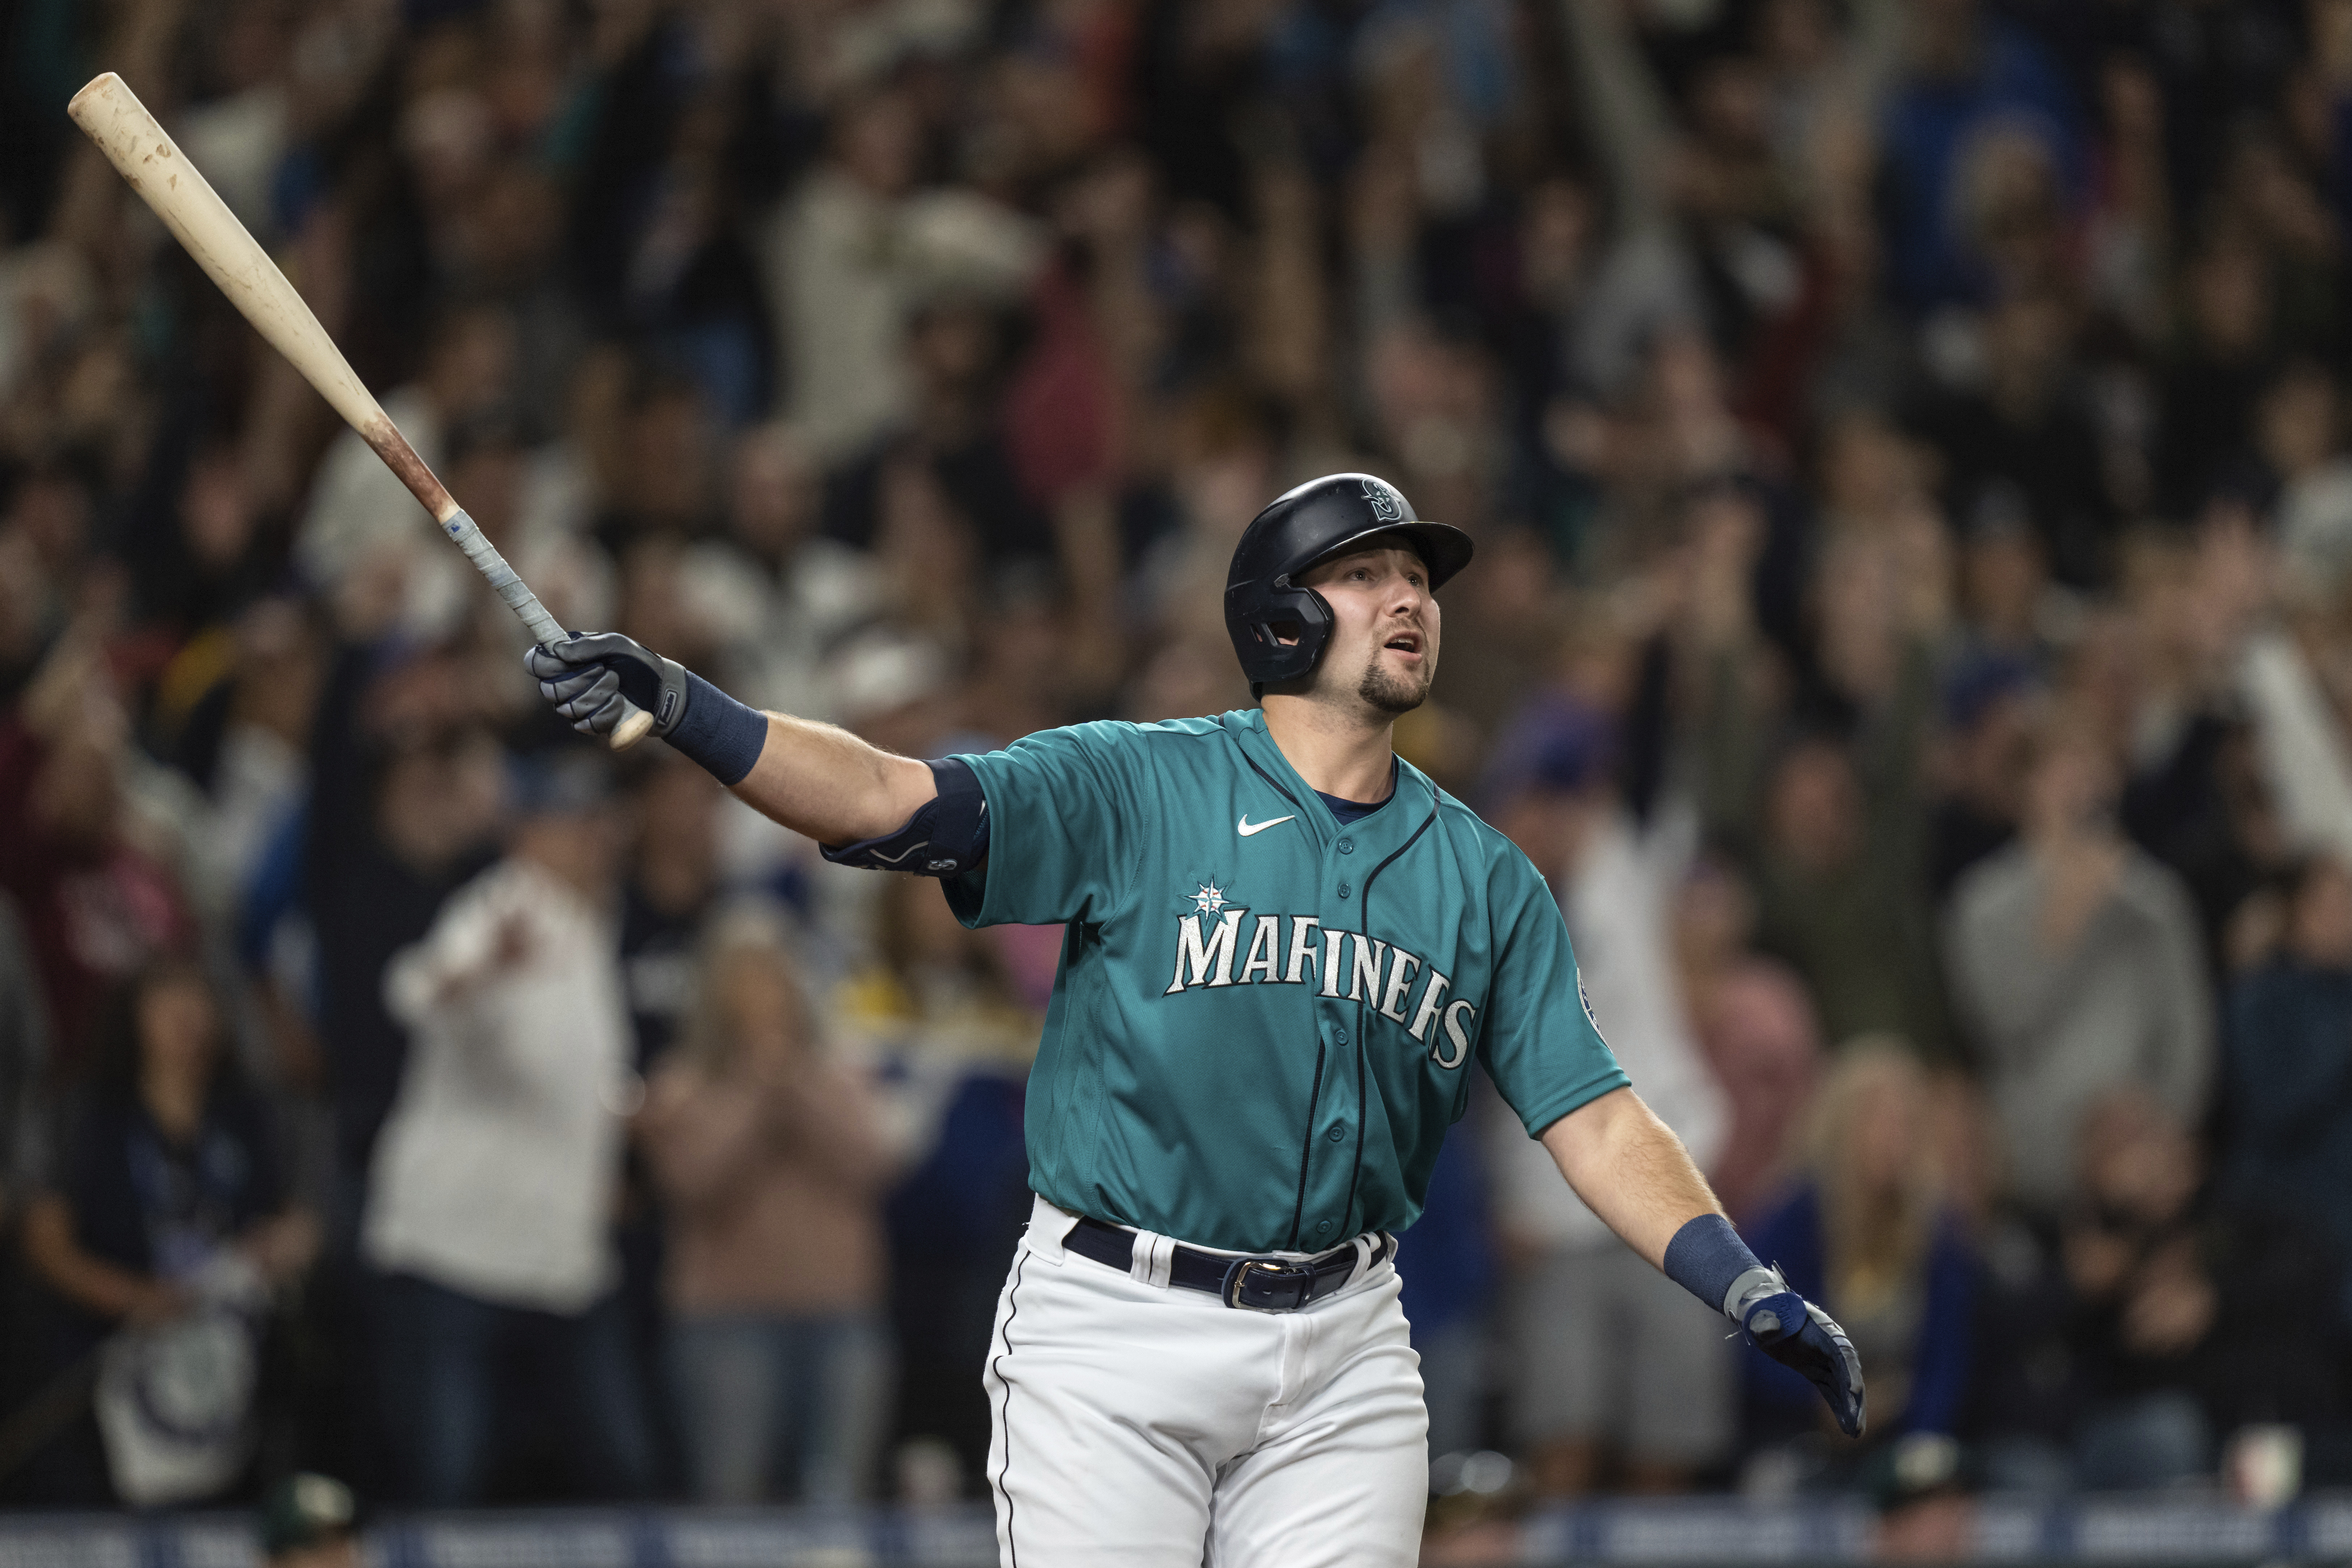 Mariners hit walk-off home run to finally end longest playoff